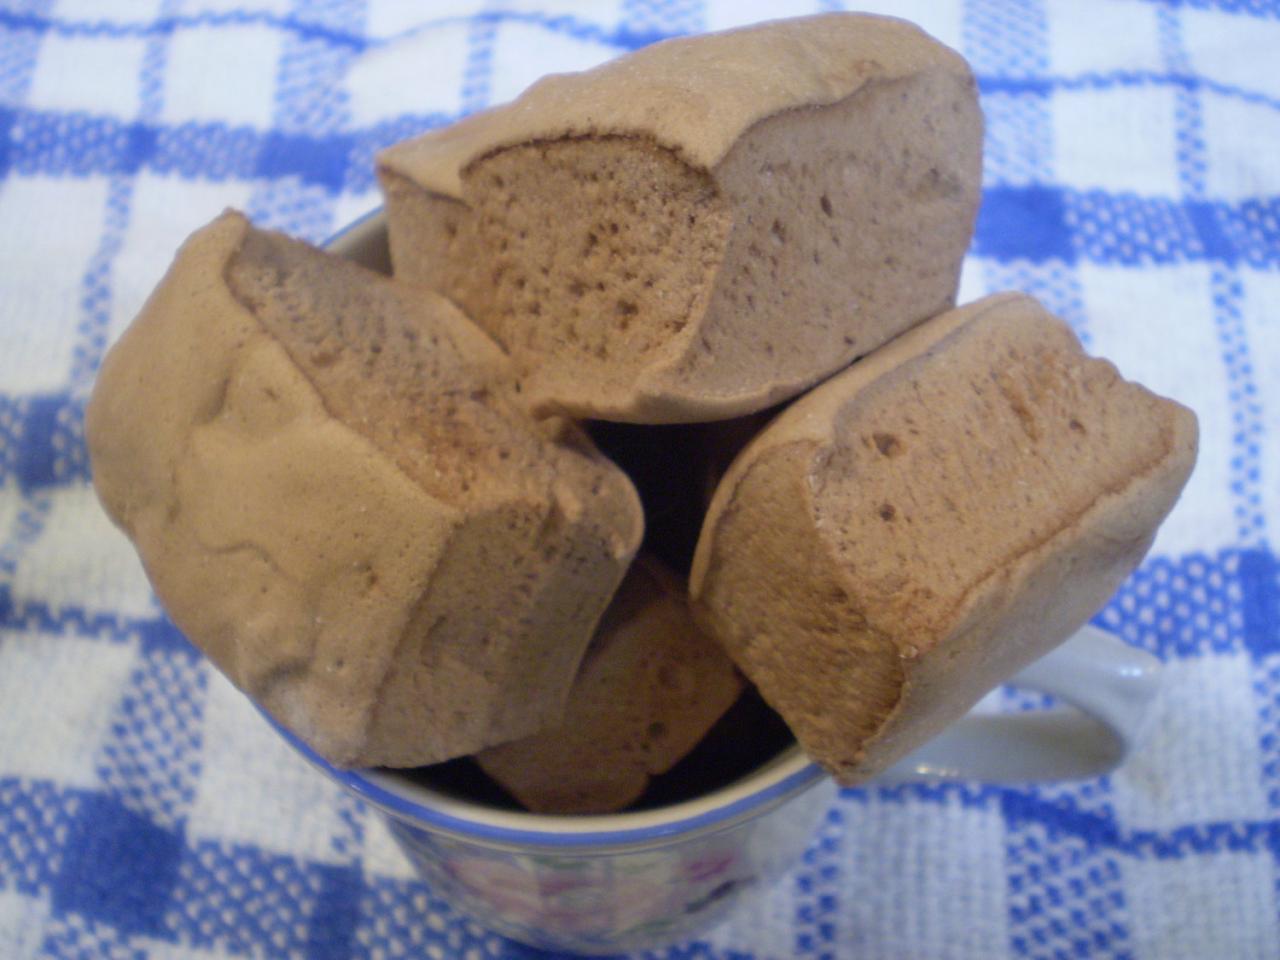 Aztec Chocolate Chipotle Pepper Marshmallows Handmade Confection